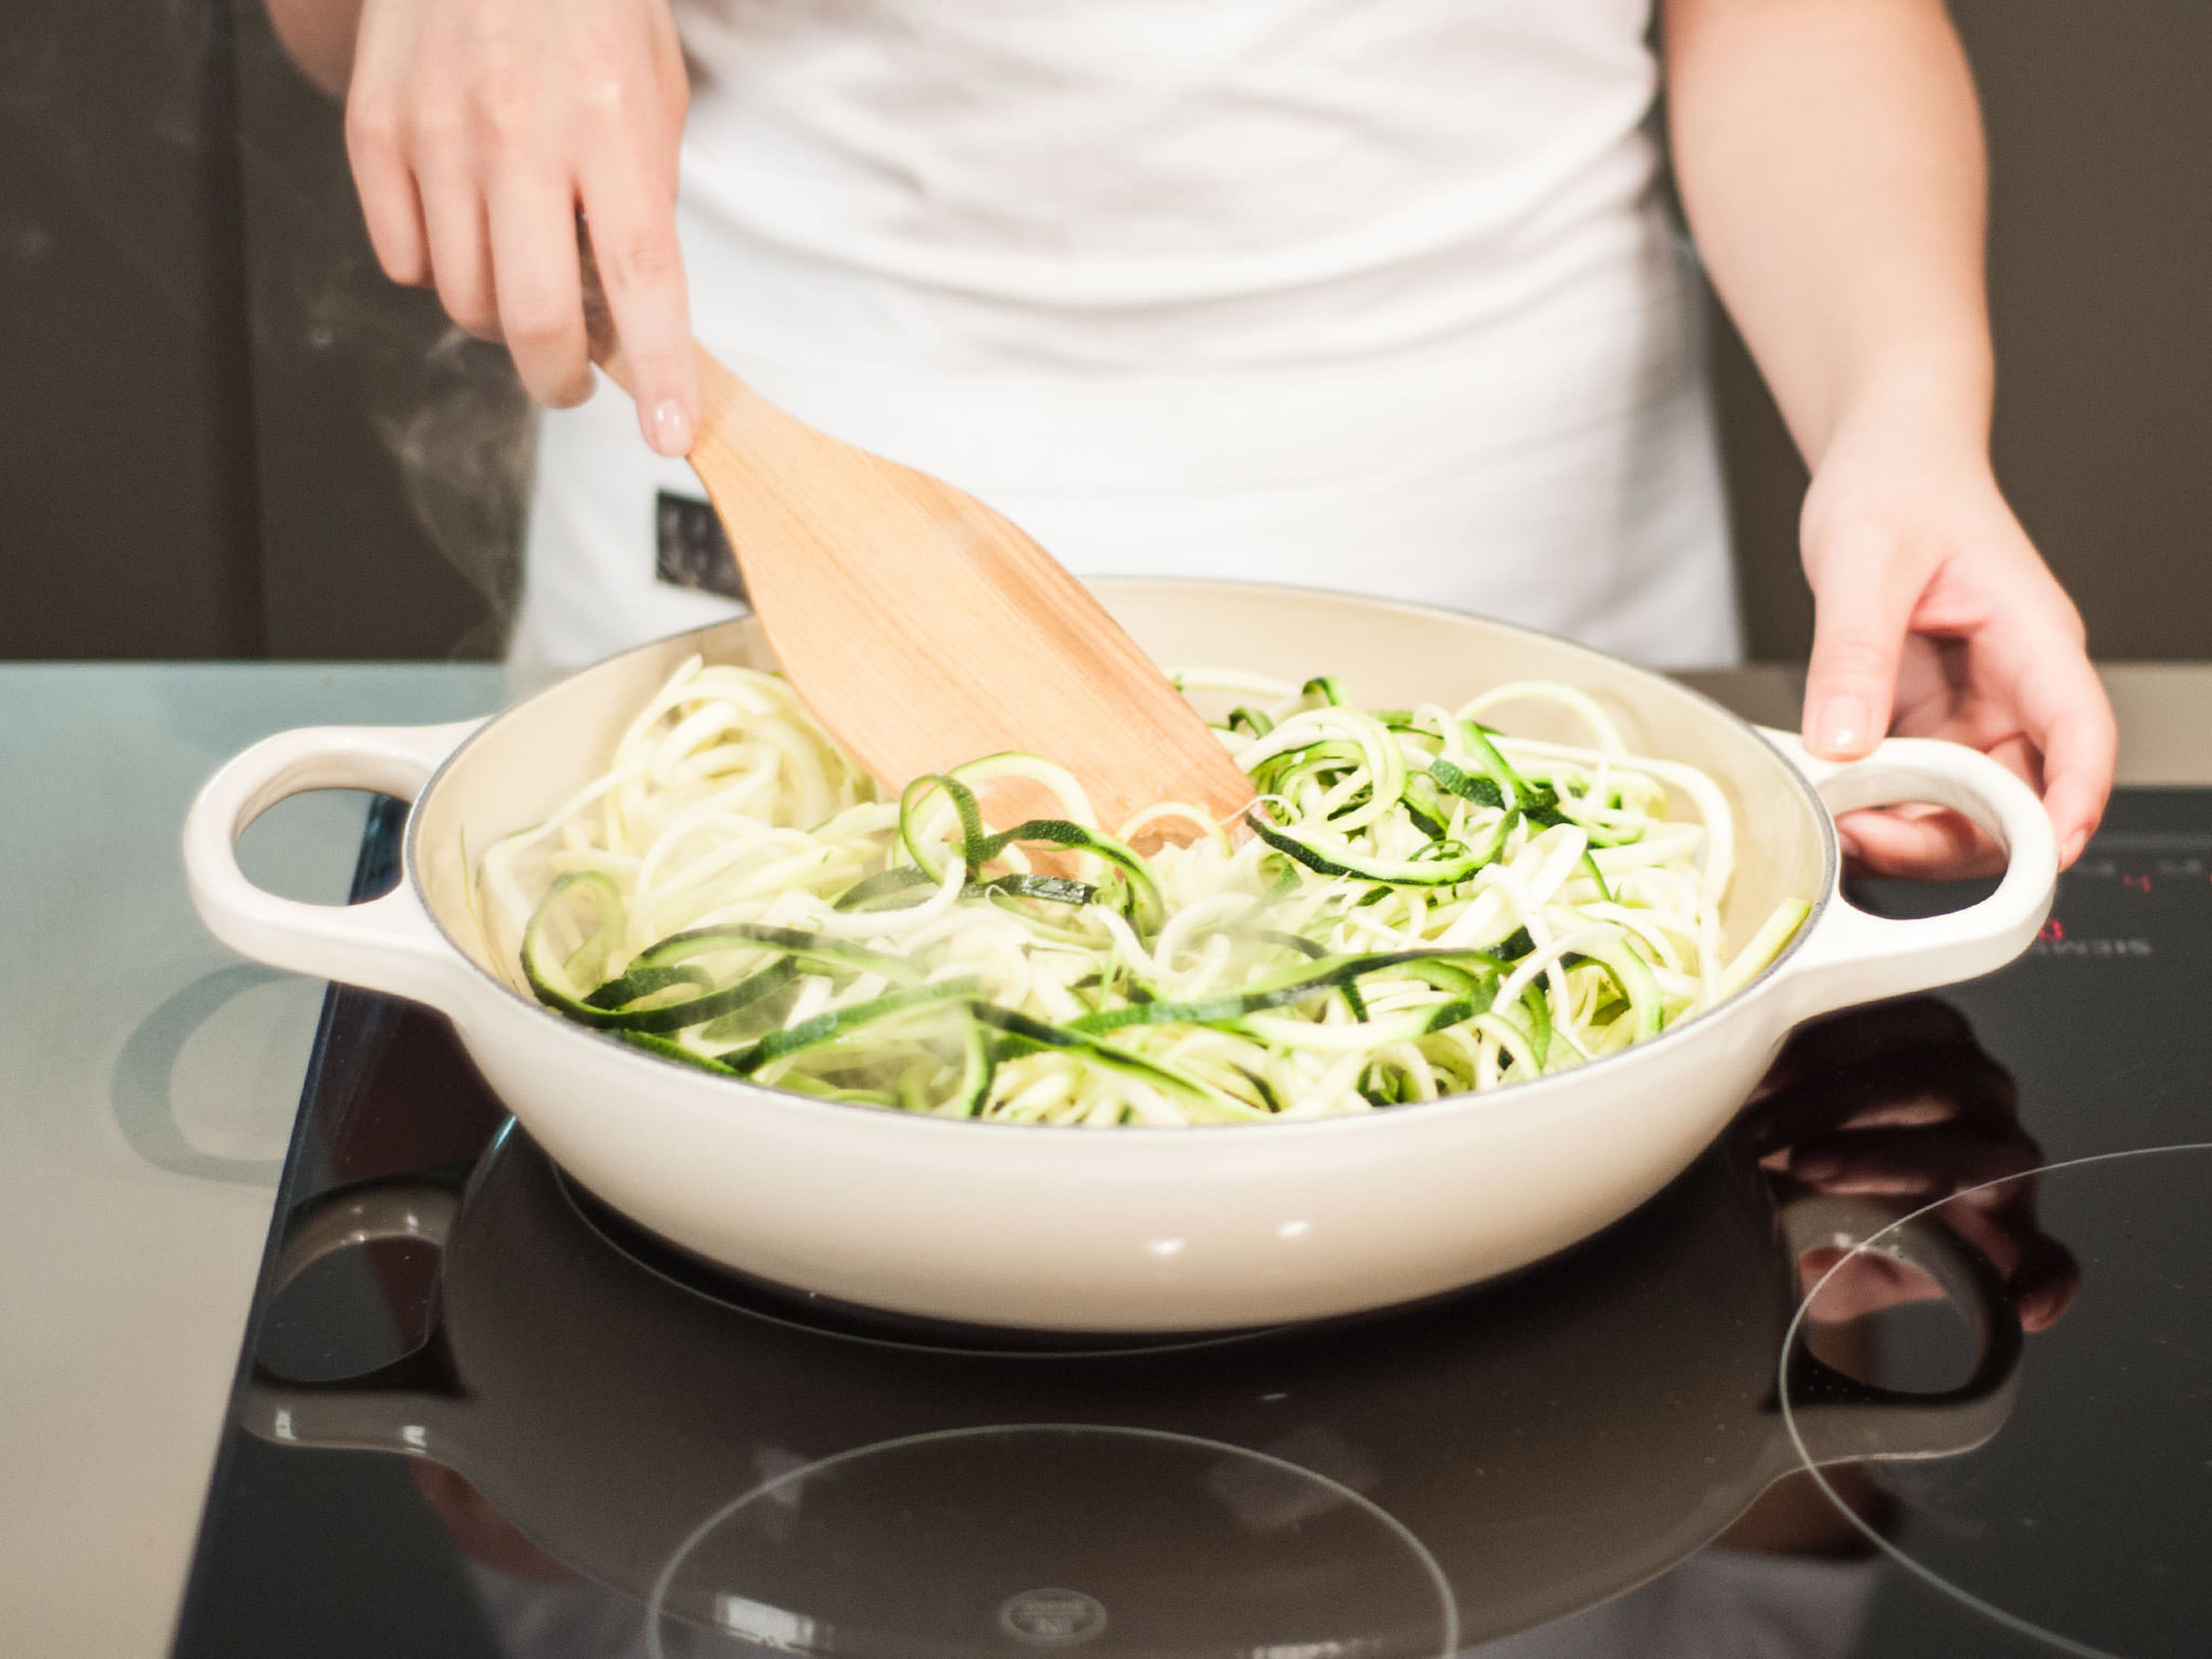 In a pan, sauté zucchini over medium heat in some olive oil. Add vegetable broth and continue to sauté for approx. 5 – 7 min. until softened.